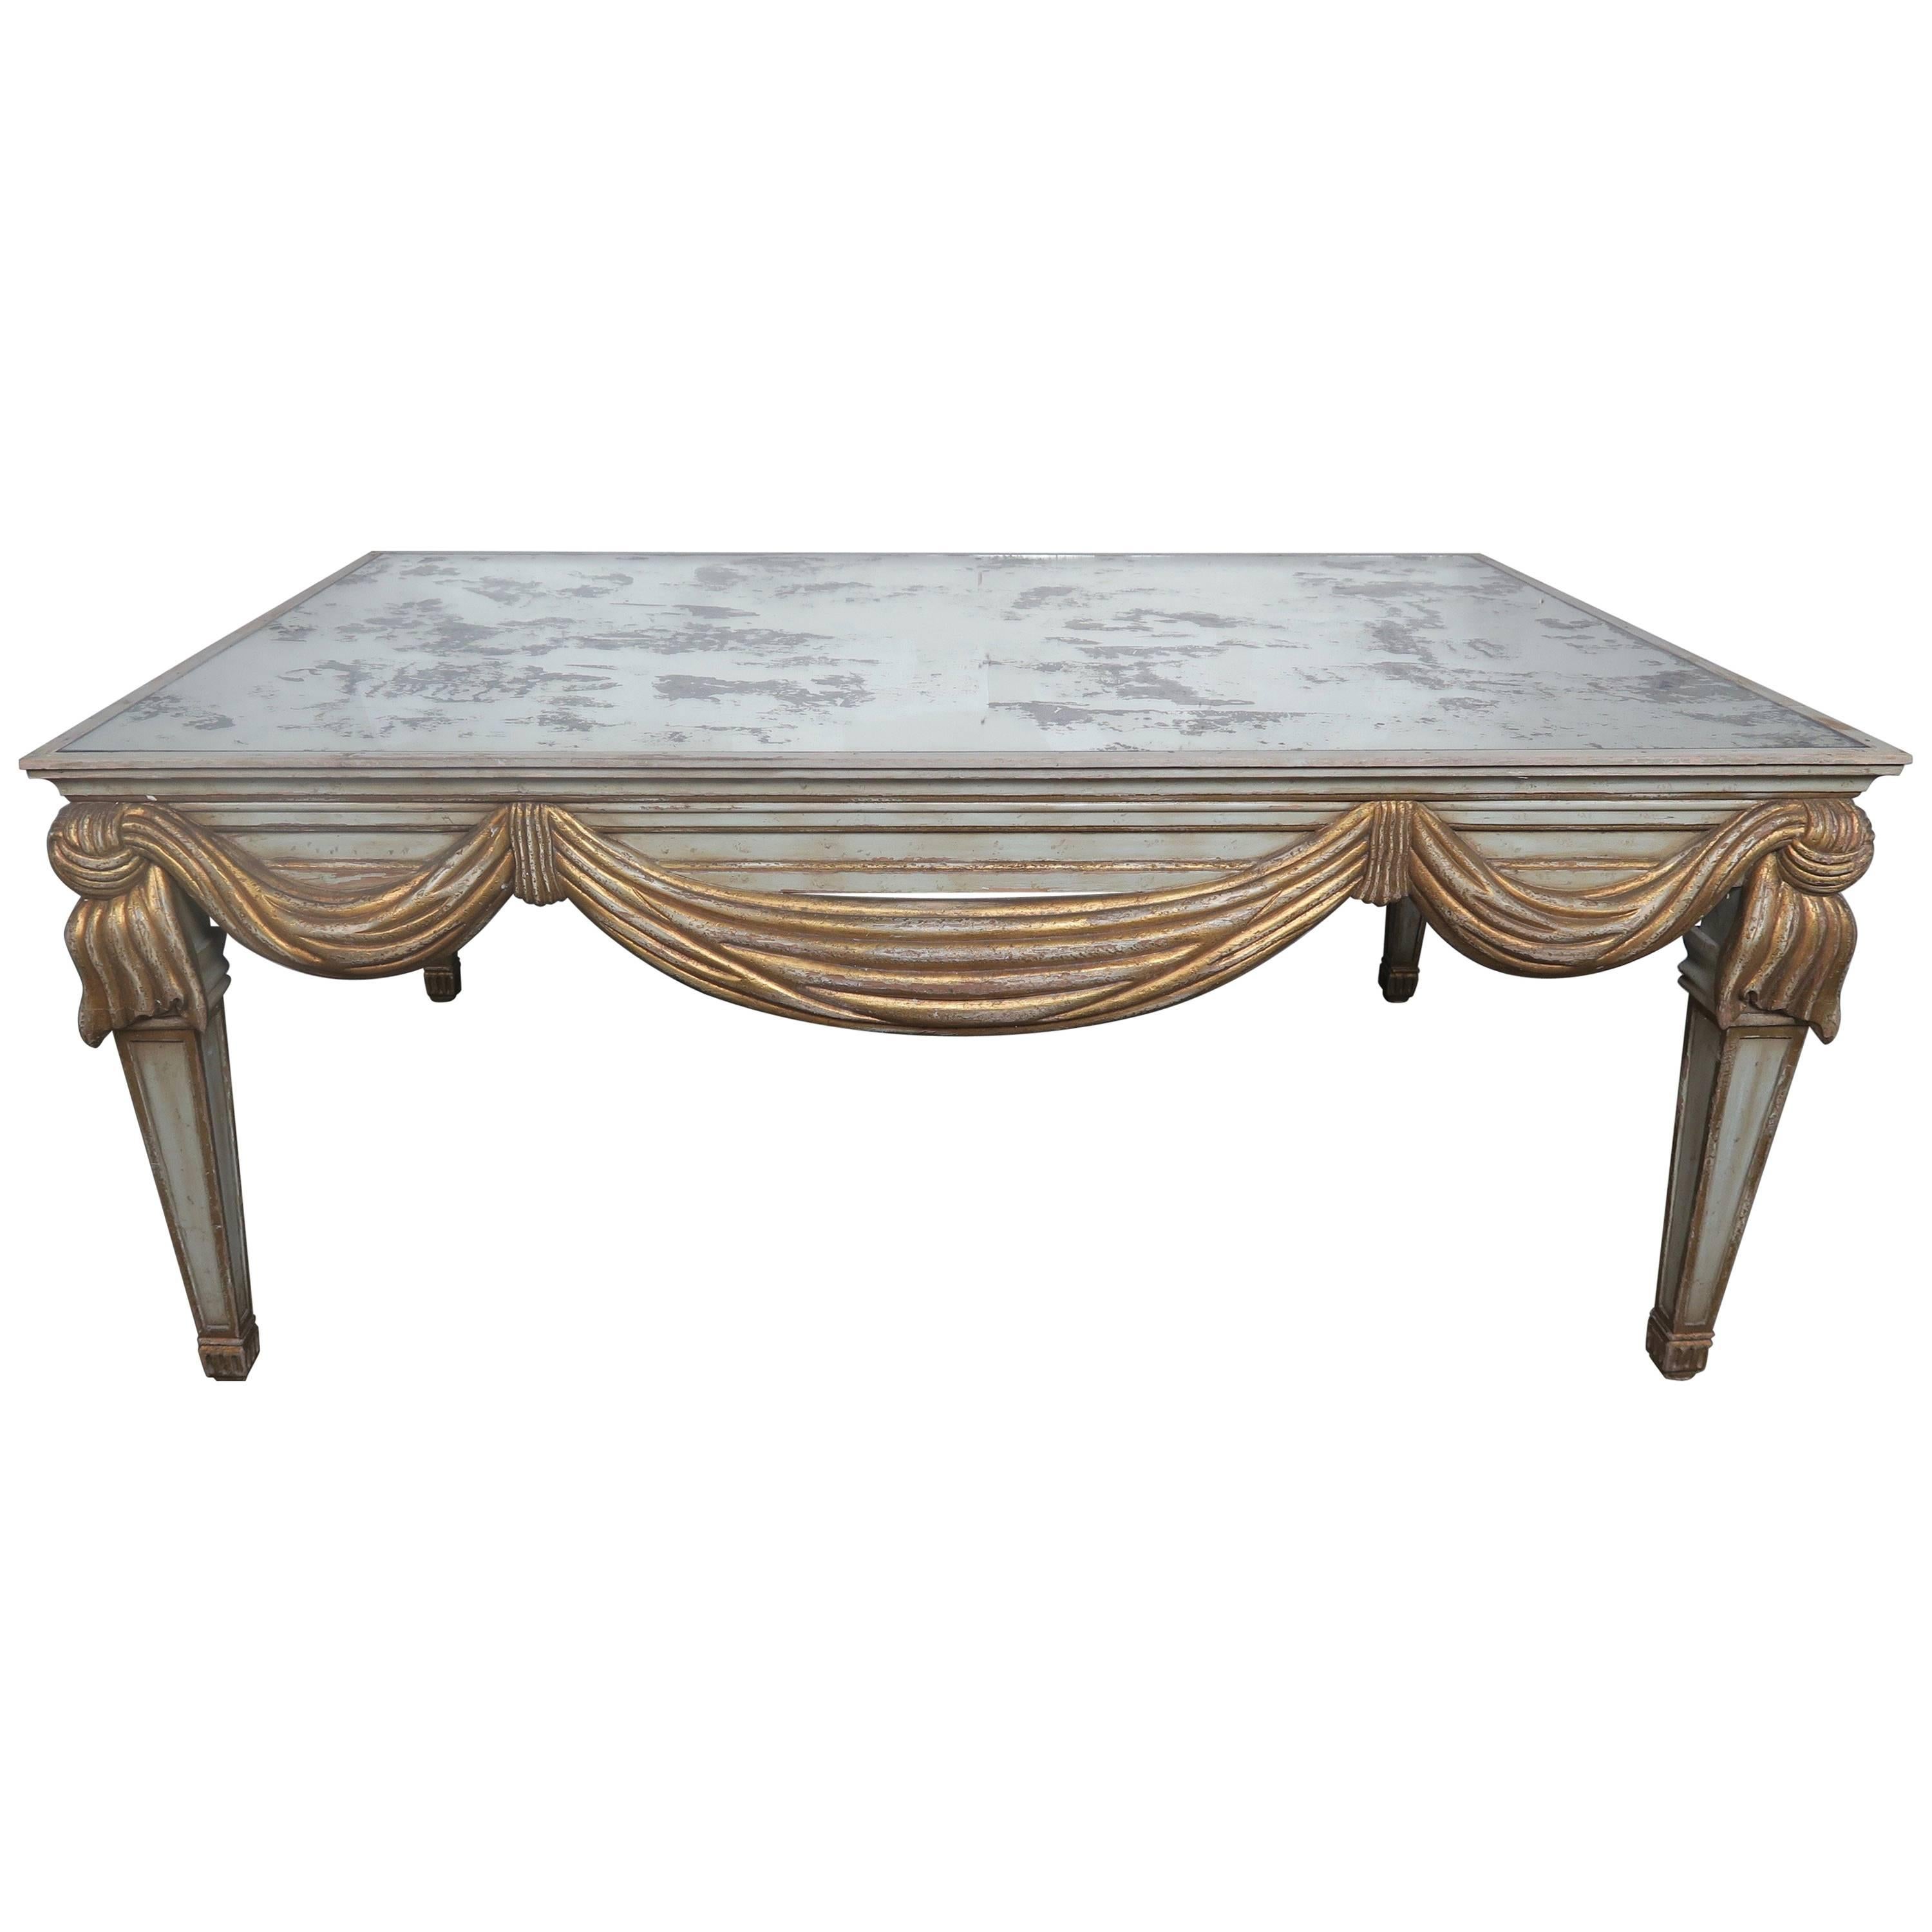 Italian Painted and Parcel-Gilt Mirrored Top Coffee Table